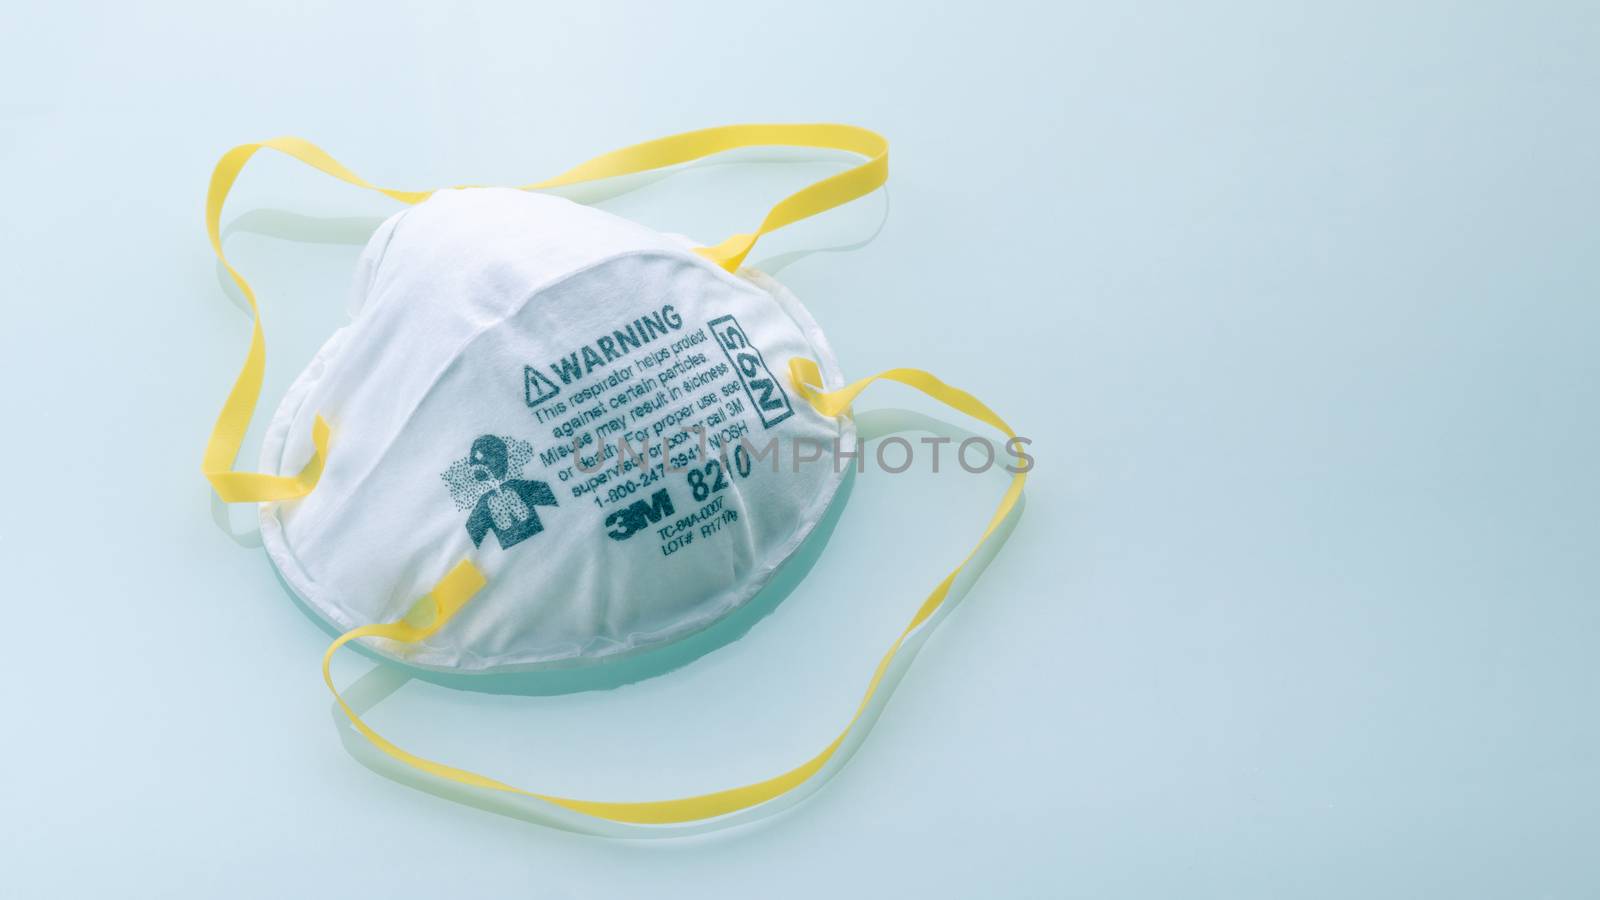 N95 mask or N95 respirator of 3M brand for industrial use, helps protect against particles, also can be used during the public health emergency of the COVID-19 pandemic situation